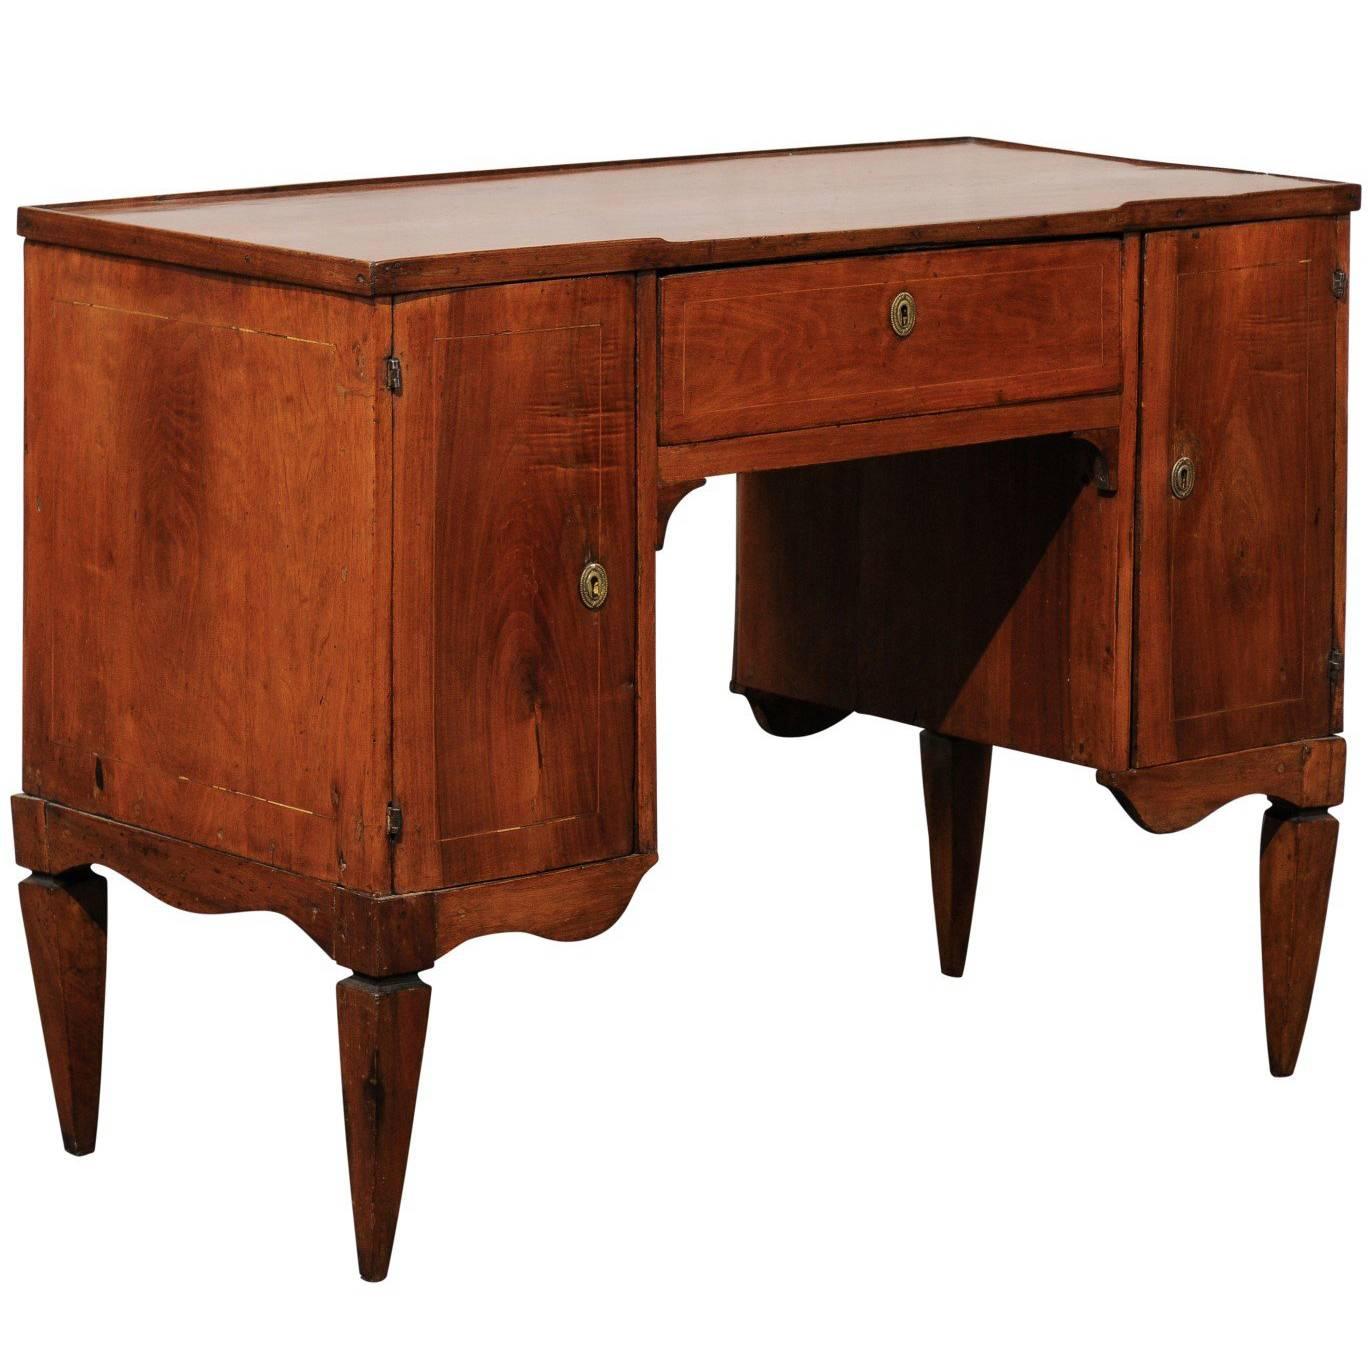 Probably 18th Century, Italian Fruitwood Desk For Sale